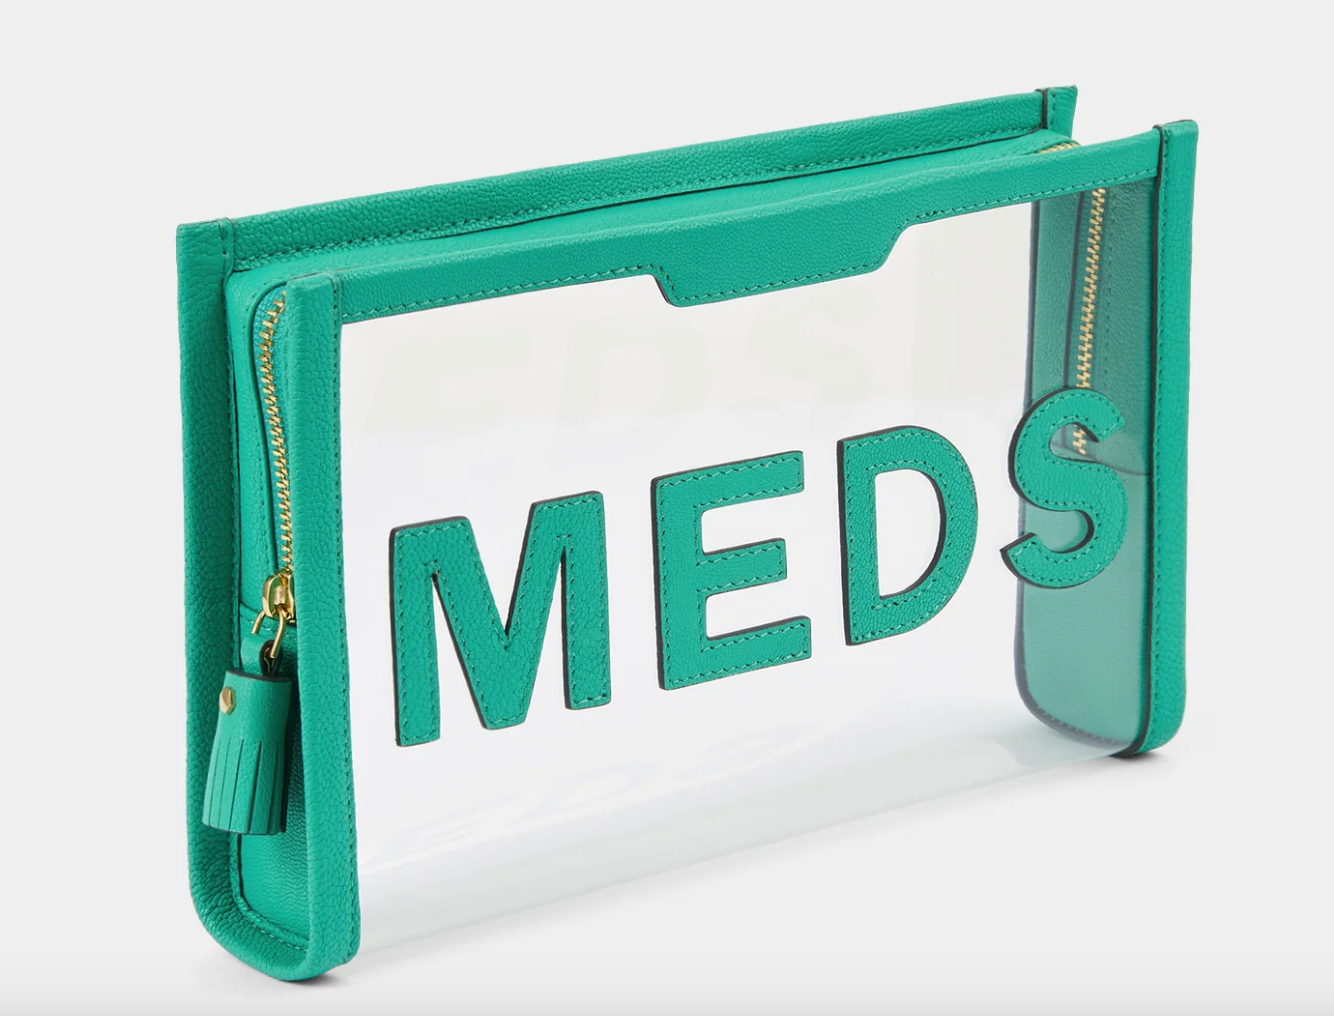 Hetre Alresford Hampshire Accessory Store ANYA HINDMARCH MEDS Pouch 